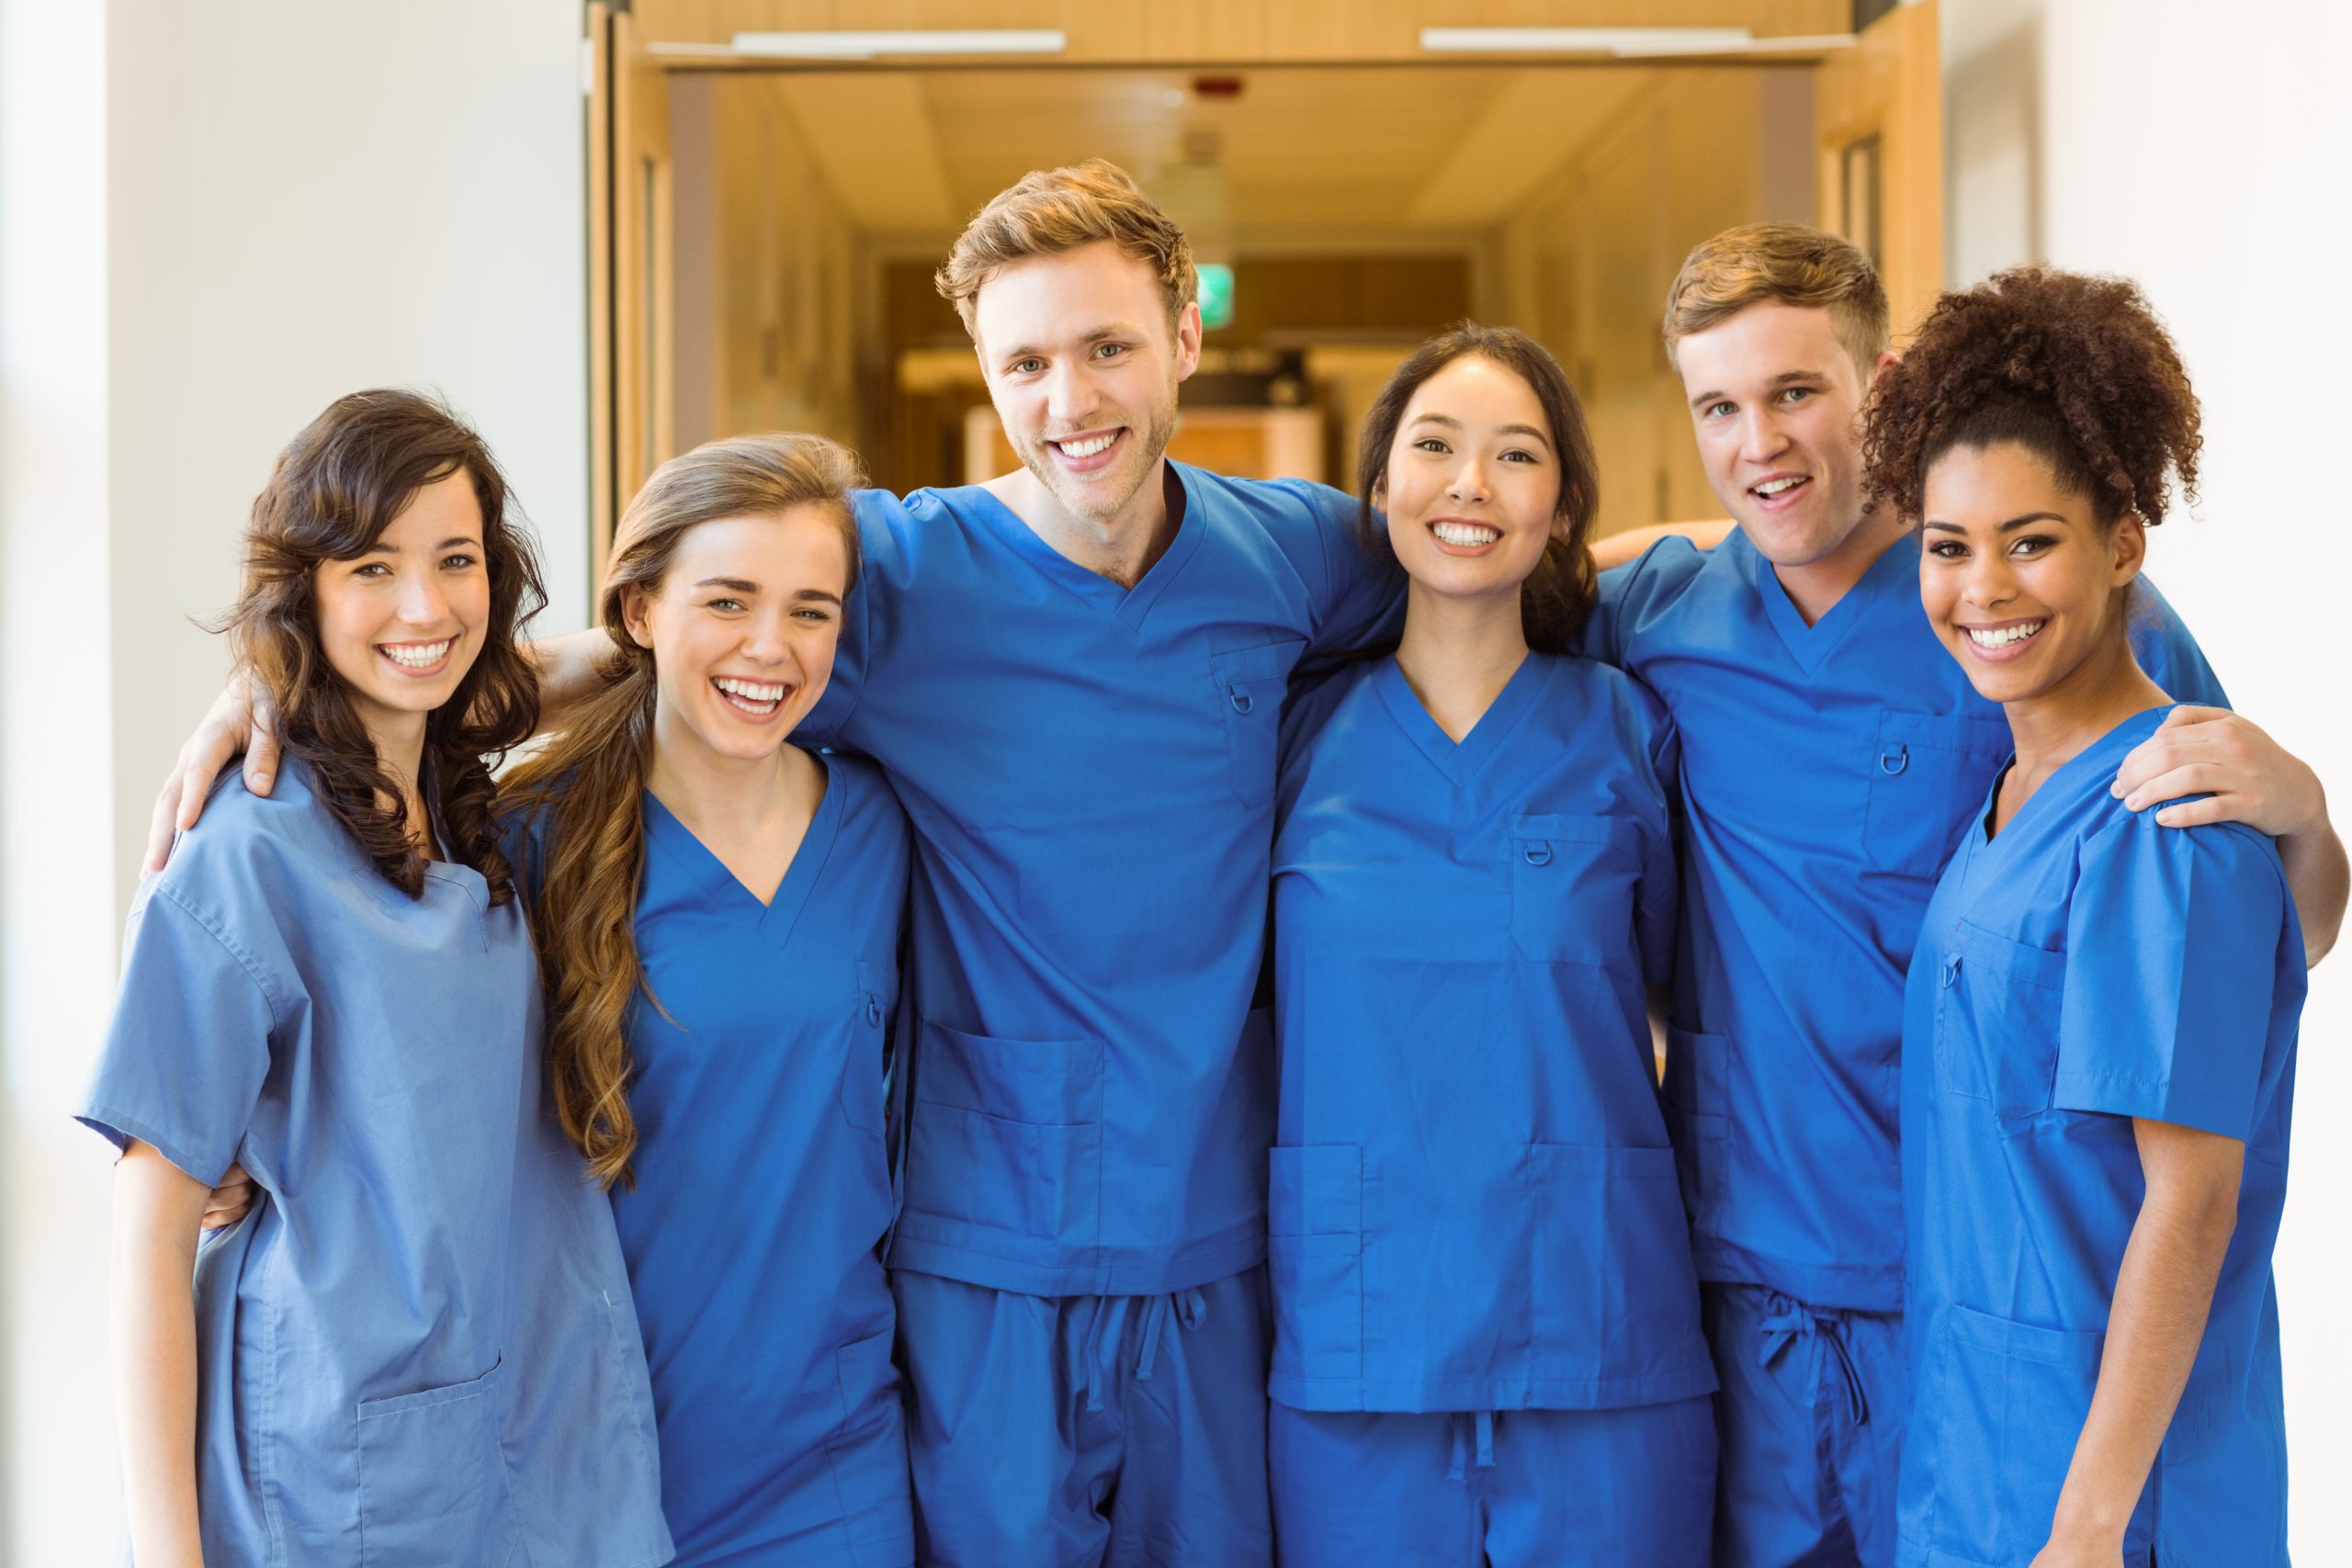 Common Entry-Level Healthcare Careers for College Graduates